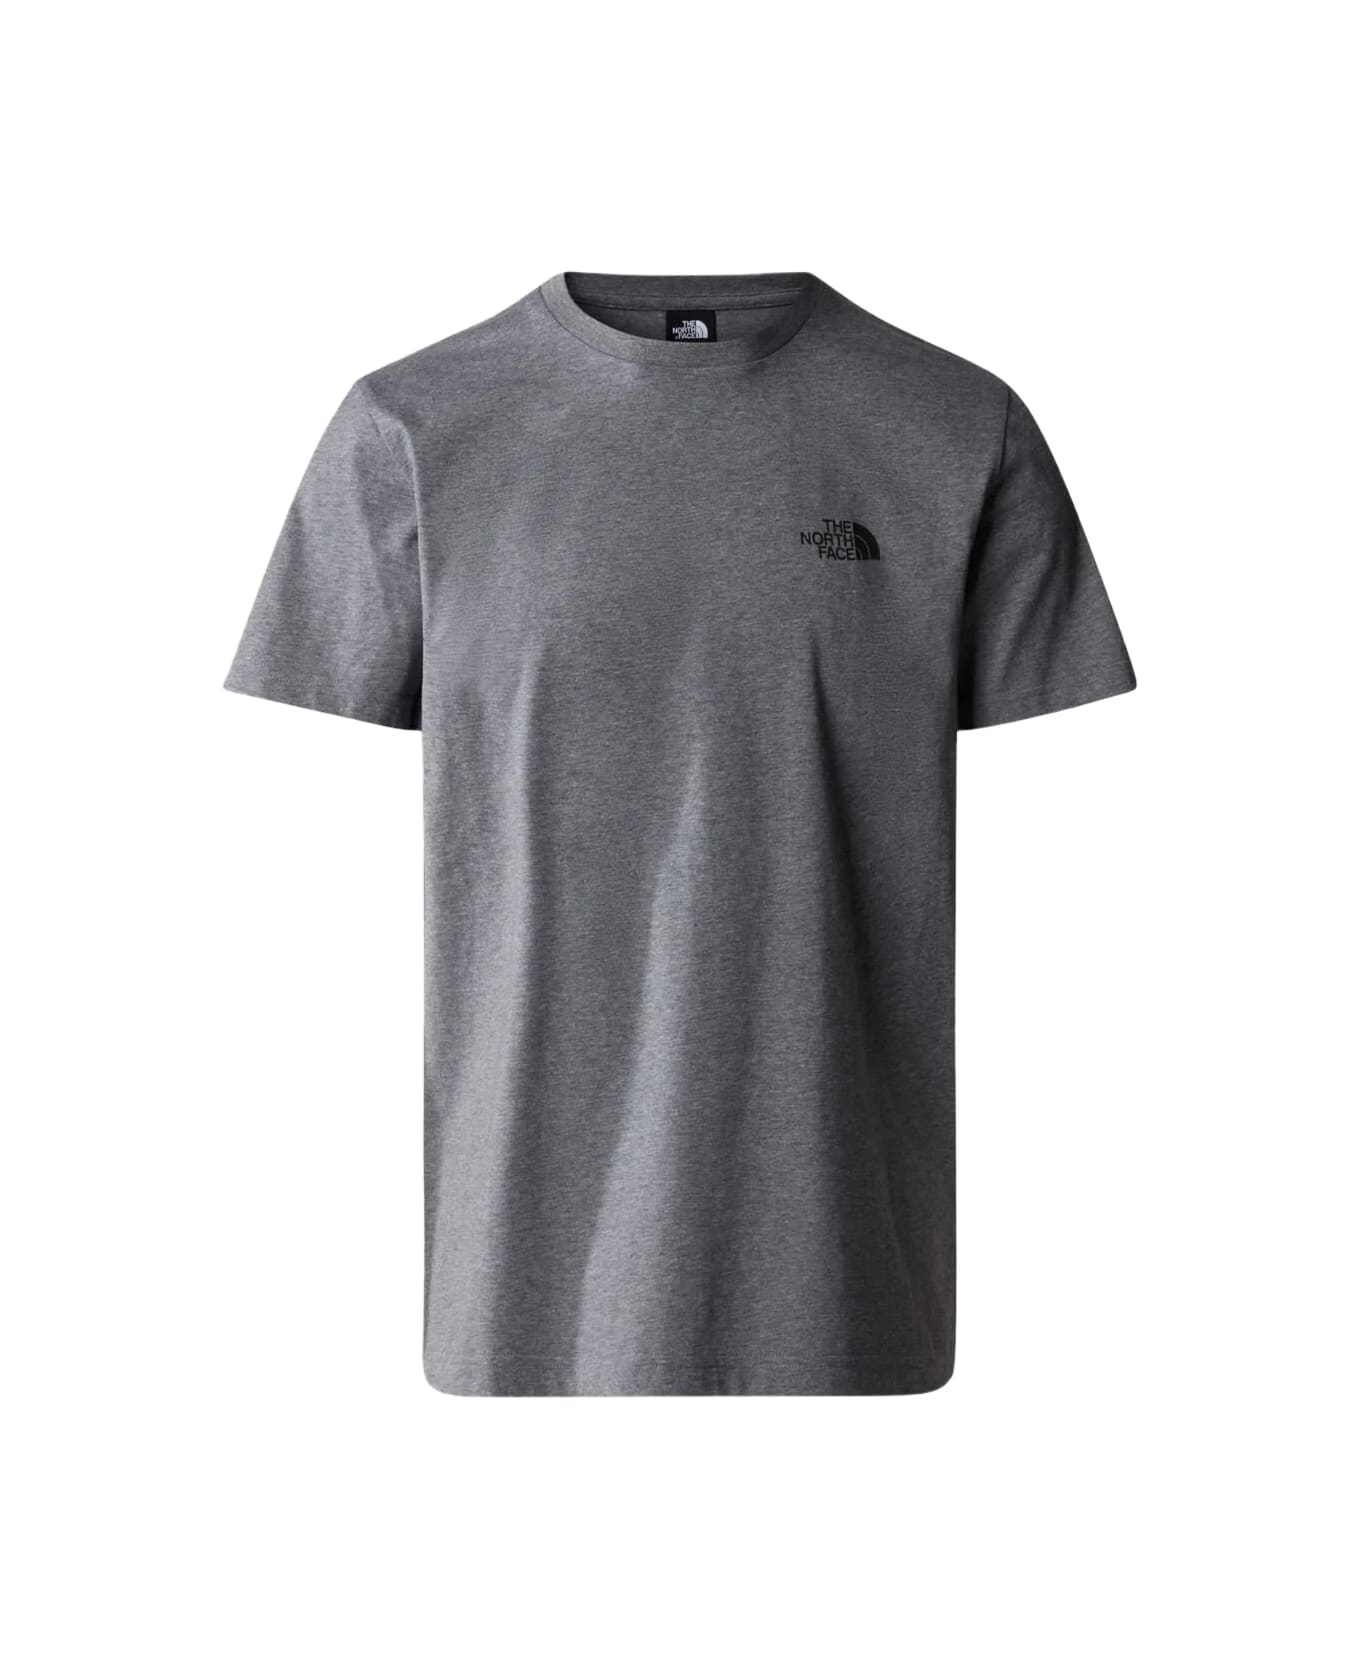 The North Face M S/s Simple Dome Tee - Tnf Medium Grey Heather